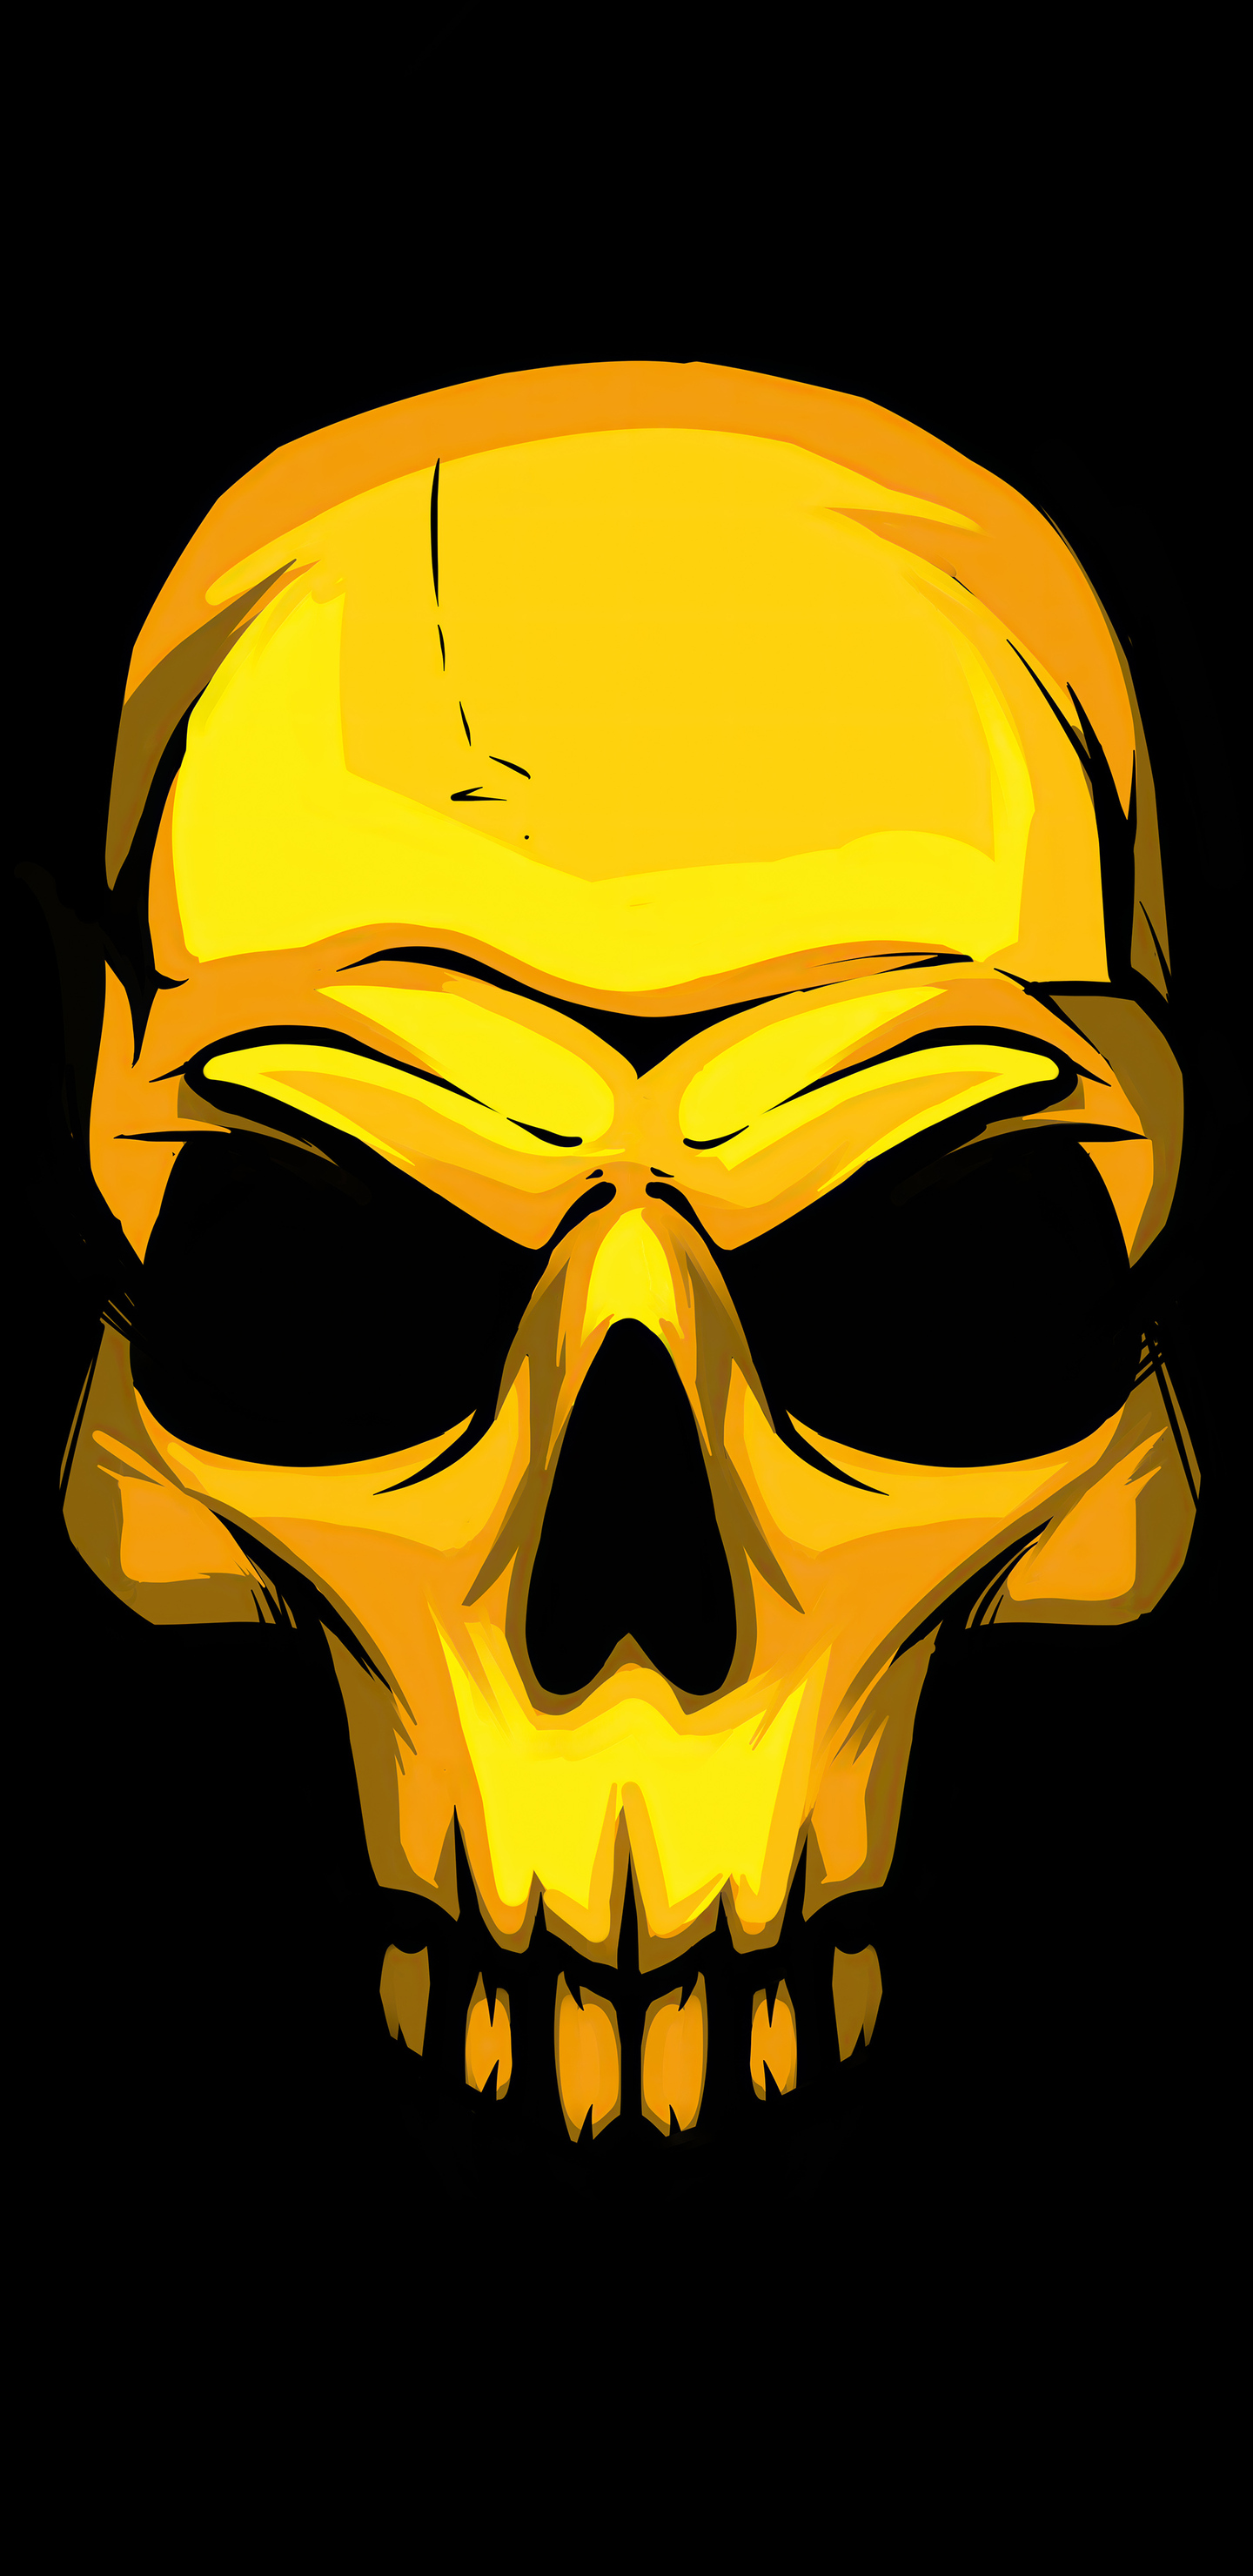 1440x2960 Gold Skull Dark Background 4k Samsung Galaxy Note 9,8, S9,S8,S8+  QHD HD 4k Wallpapers, Images, Backgrounds, Photos and Pictures